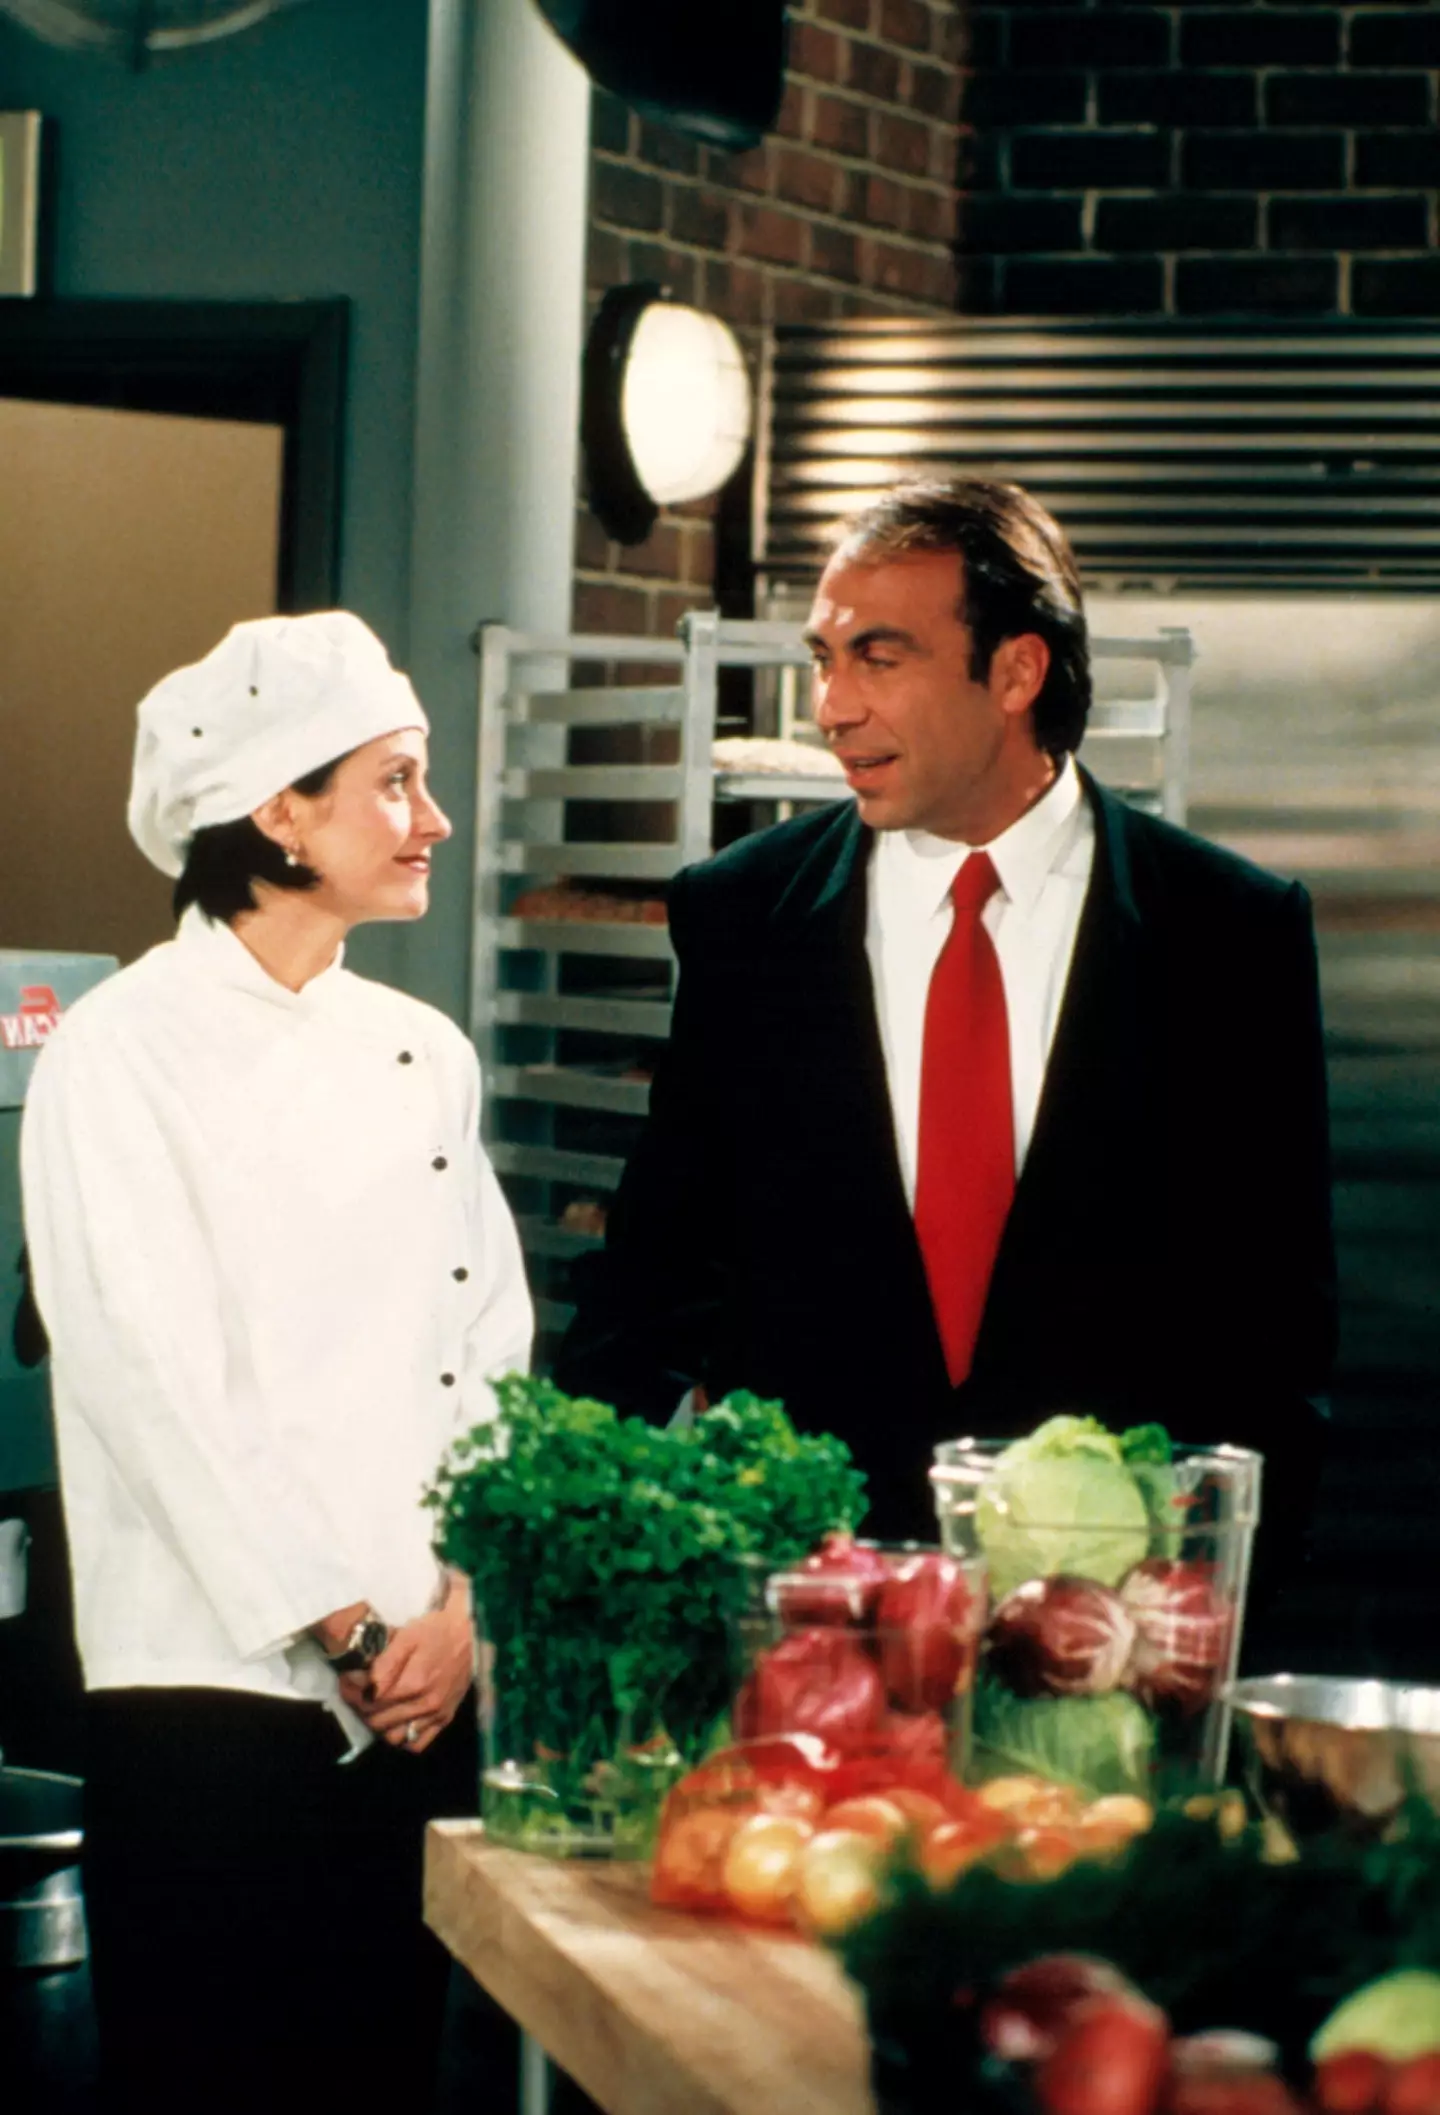 Taylor Negron owned the restaurant.